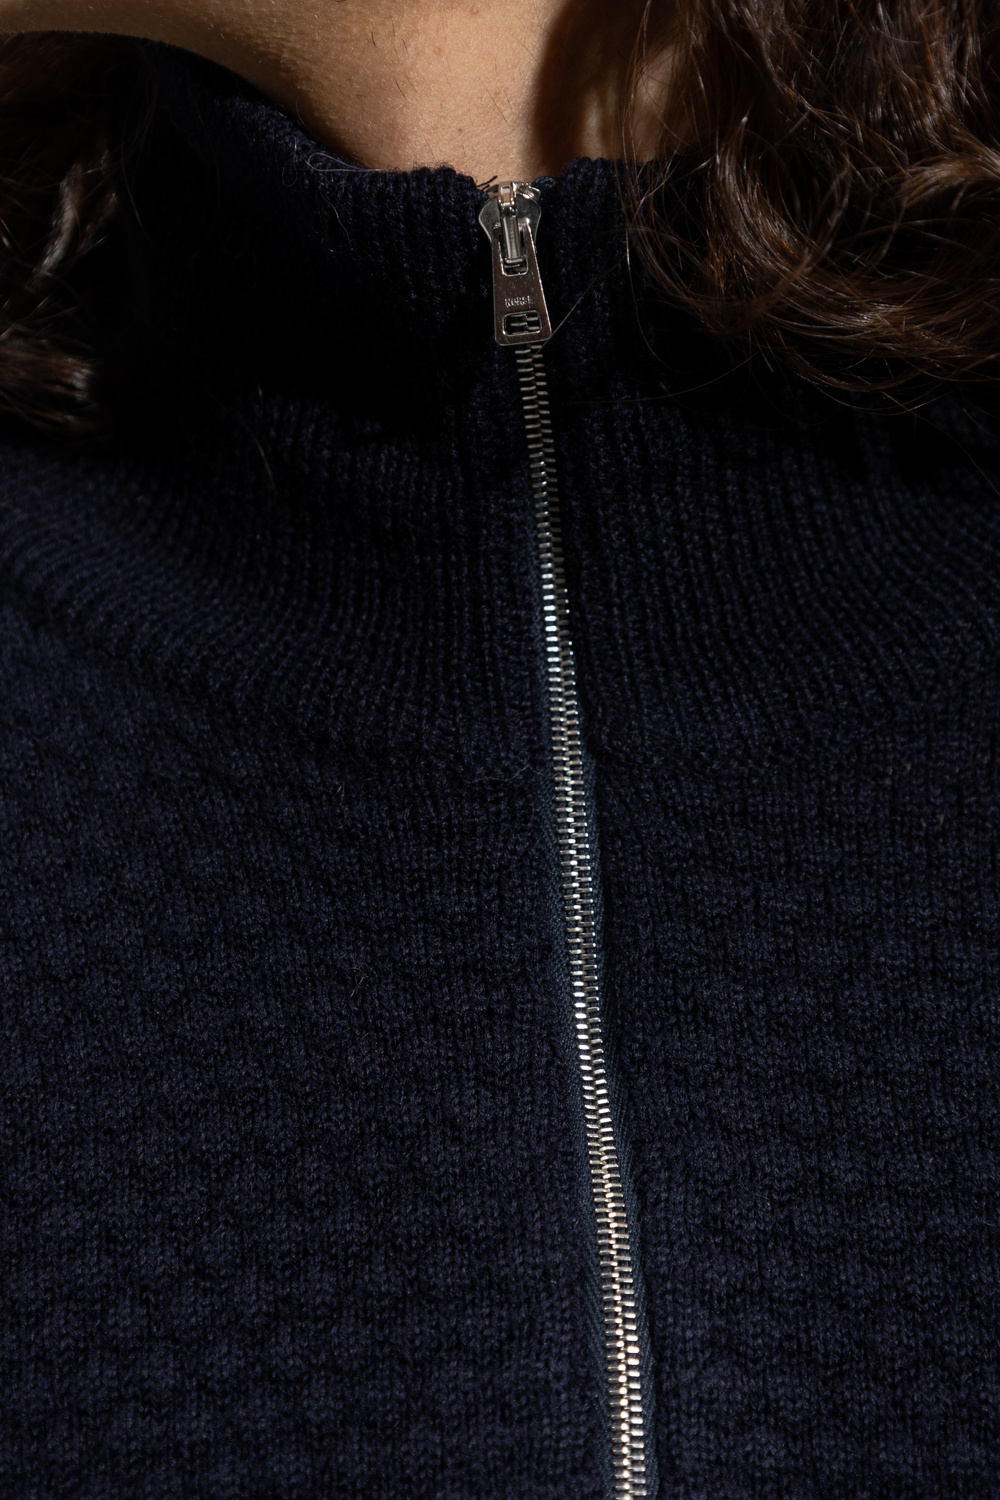 Norse Projects ‘Fjord’ Bobo sweater